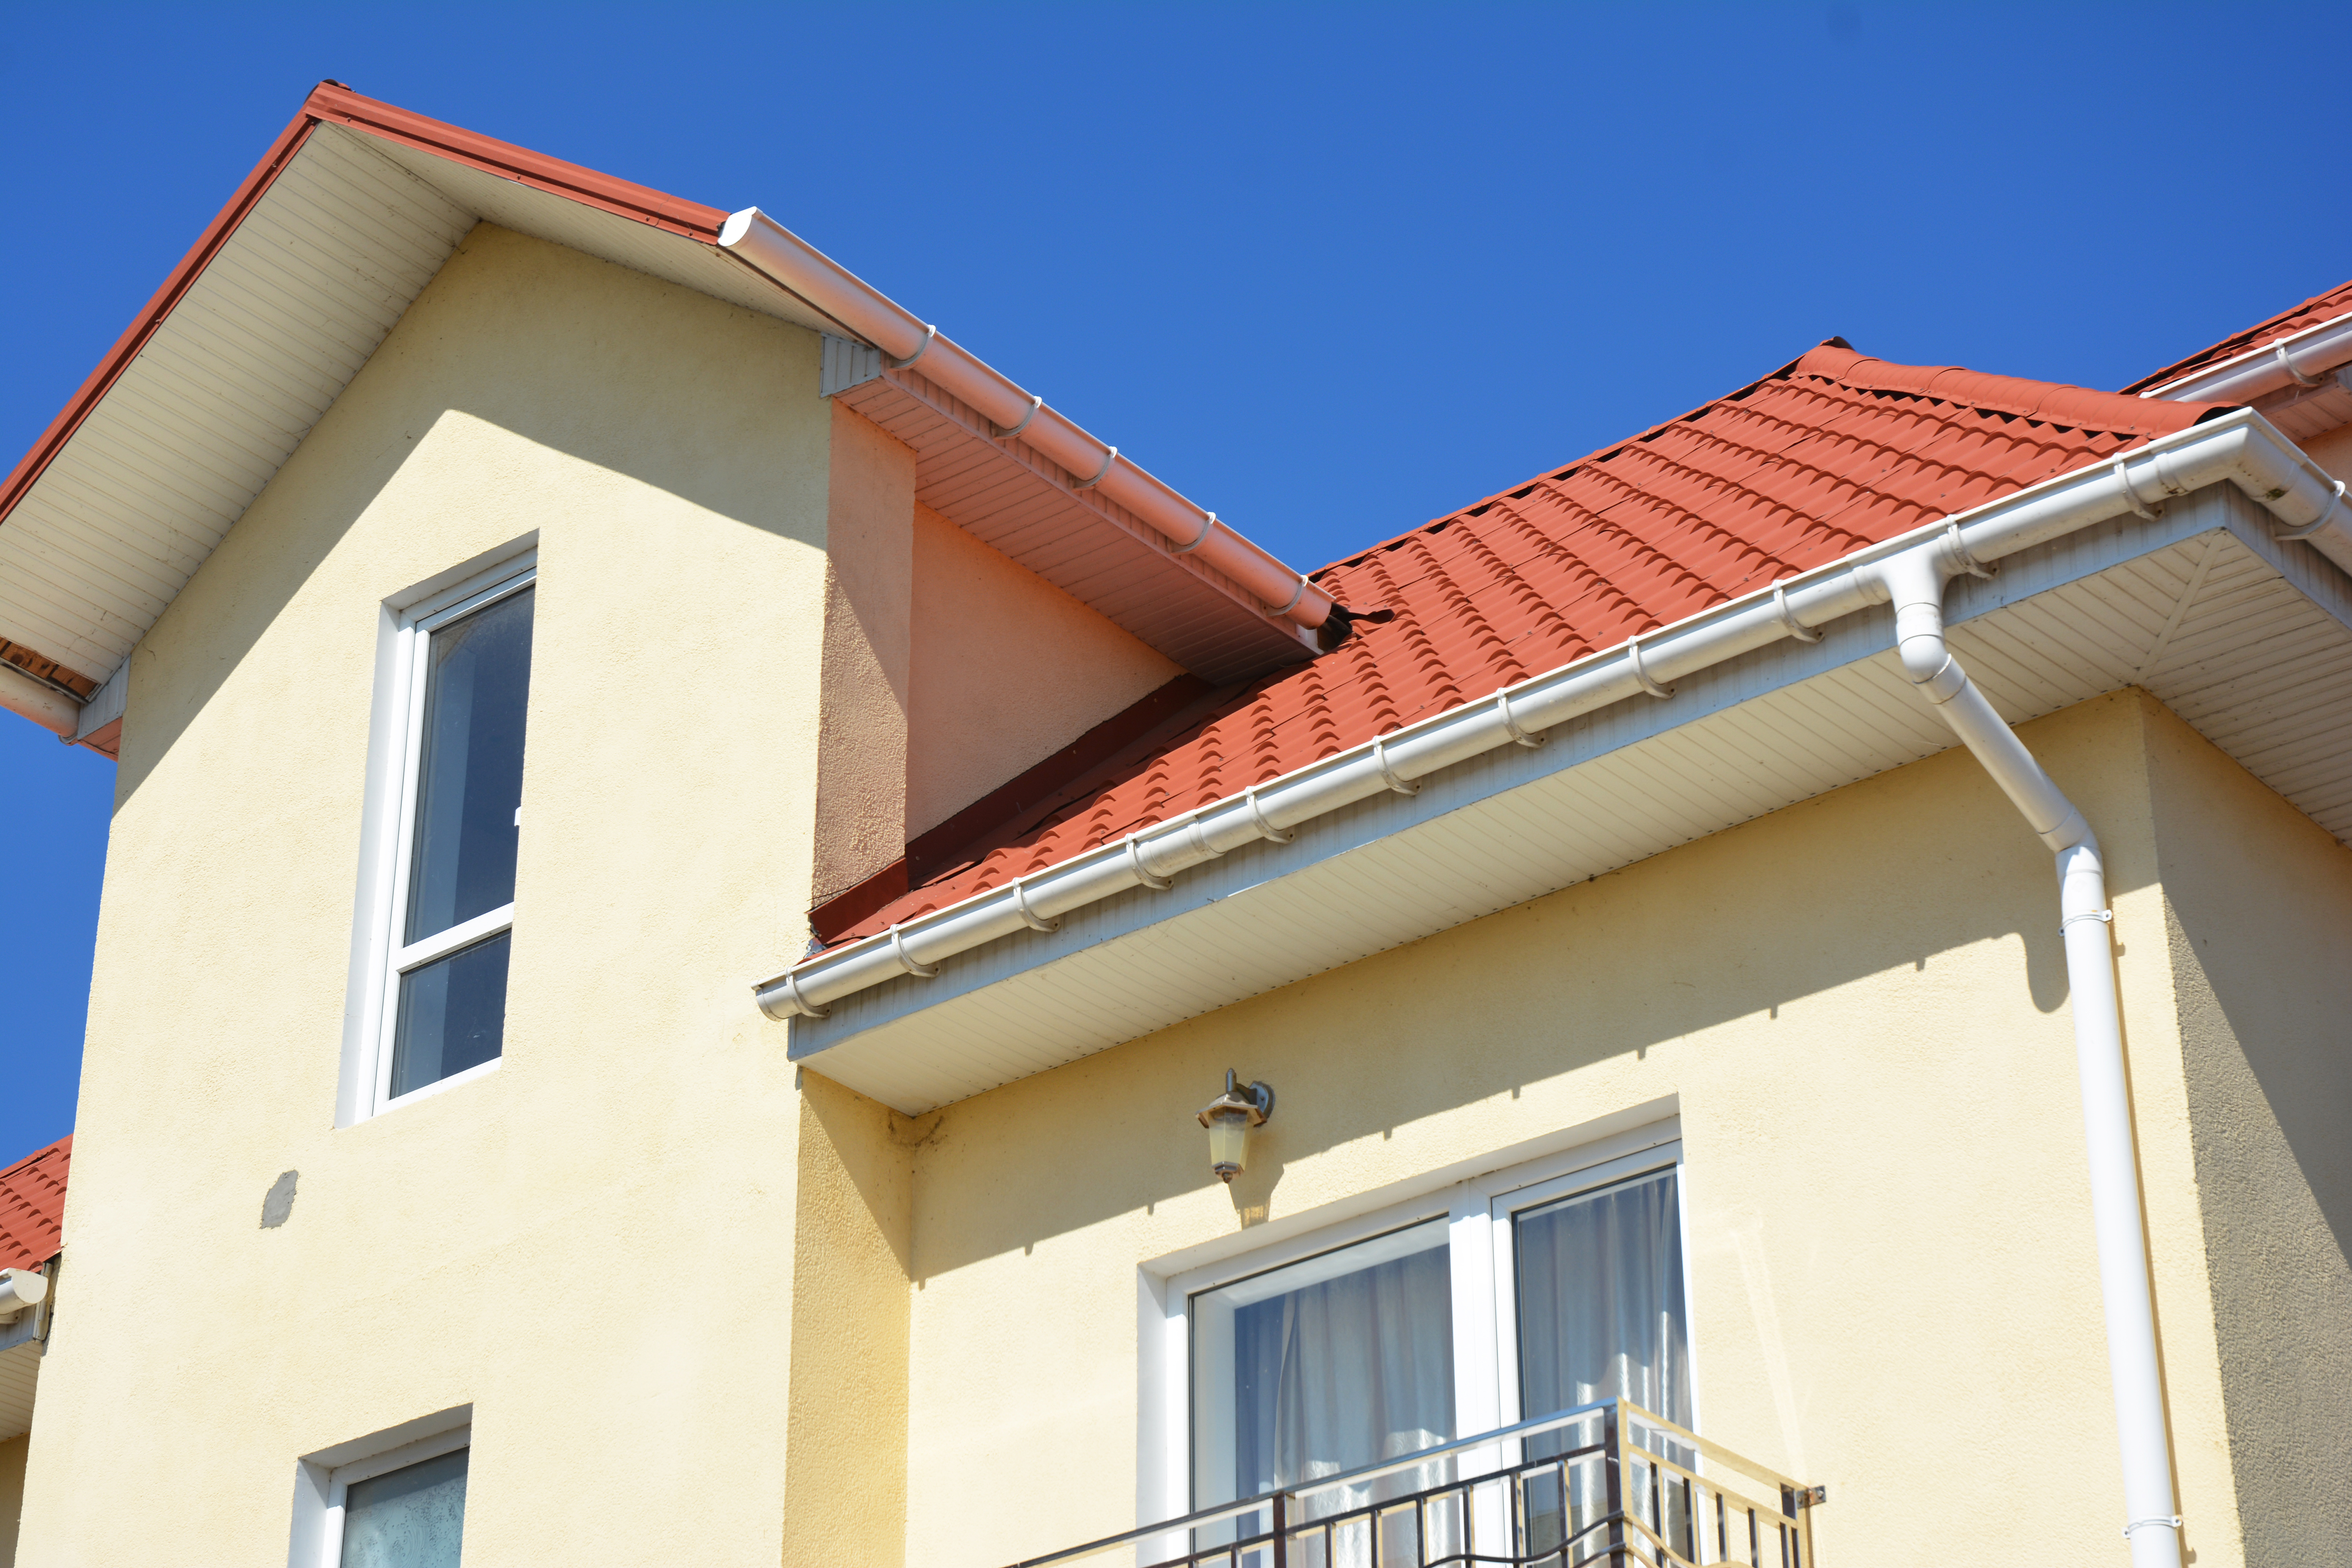 Learn More About Your Roof